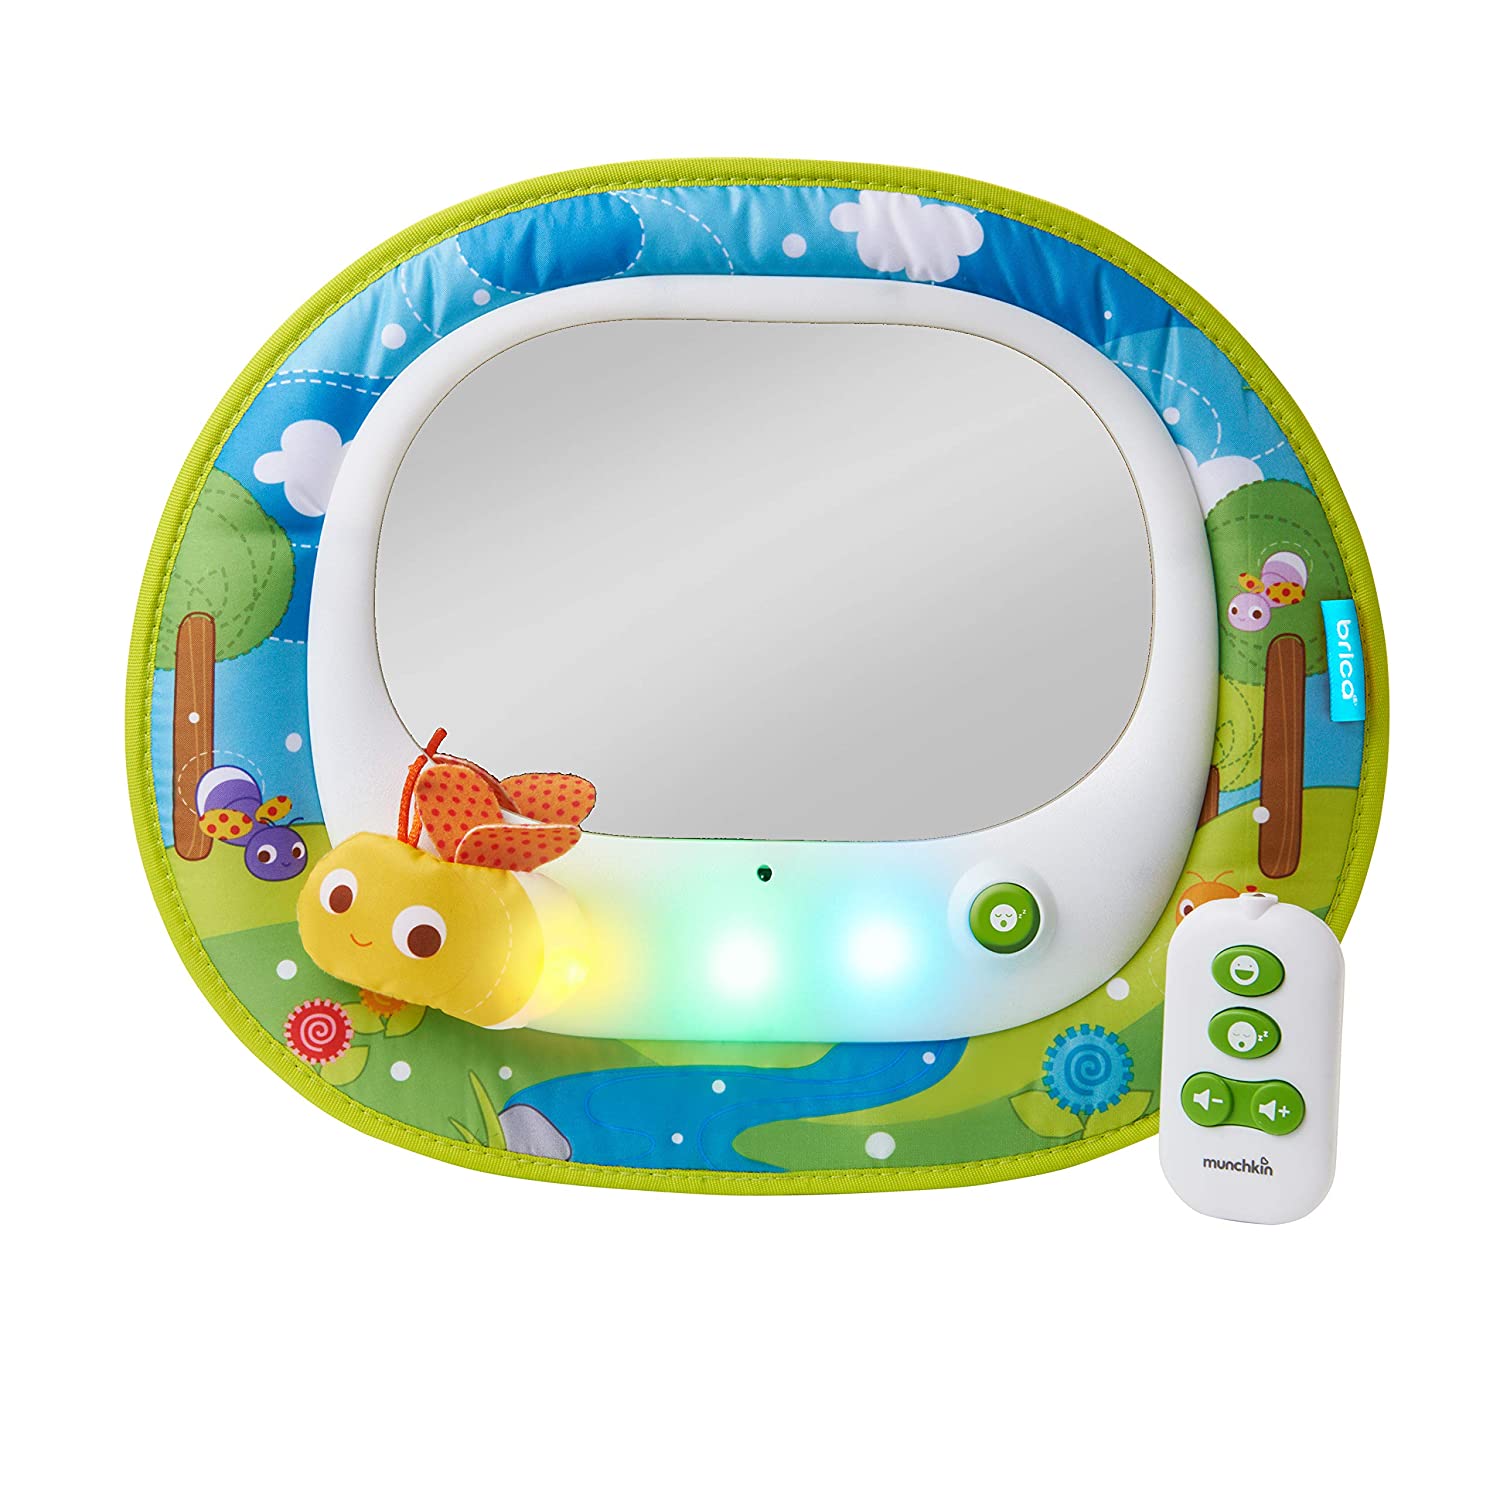 Munchkin Brica Firefly Baby in-Sight Car Mirror, Crash Tested and Shatter Resistant